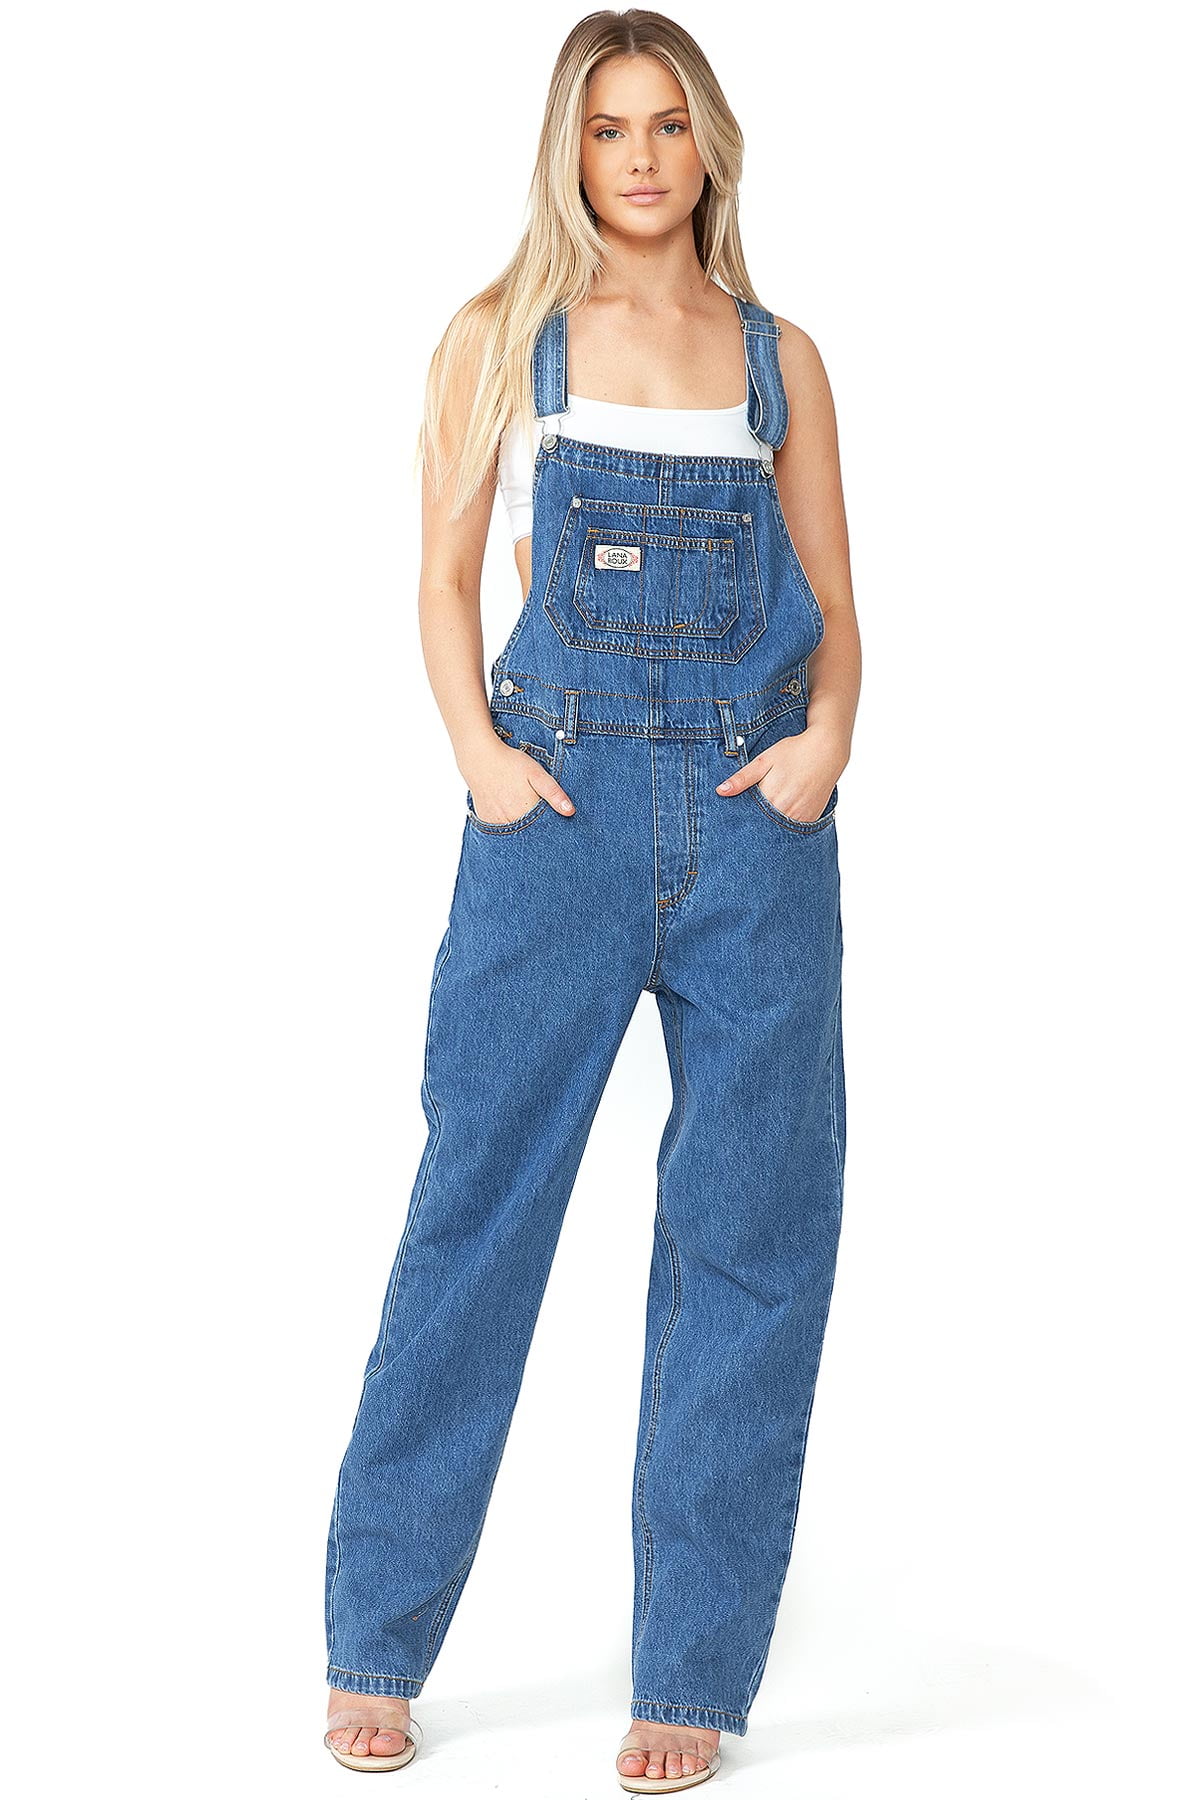 Lana Roux Womens Relaxed Fit Oversize Baggy Boyfriend Jean Overalls ...